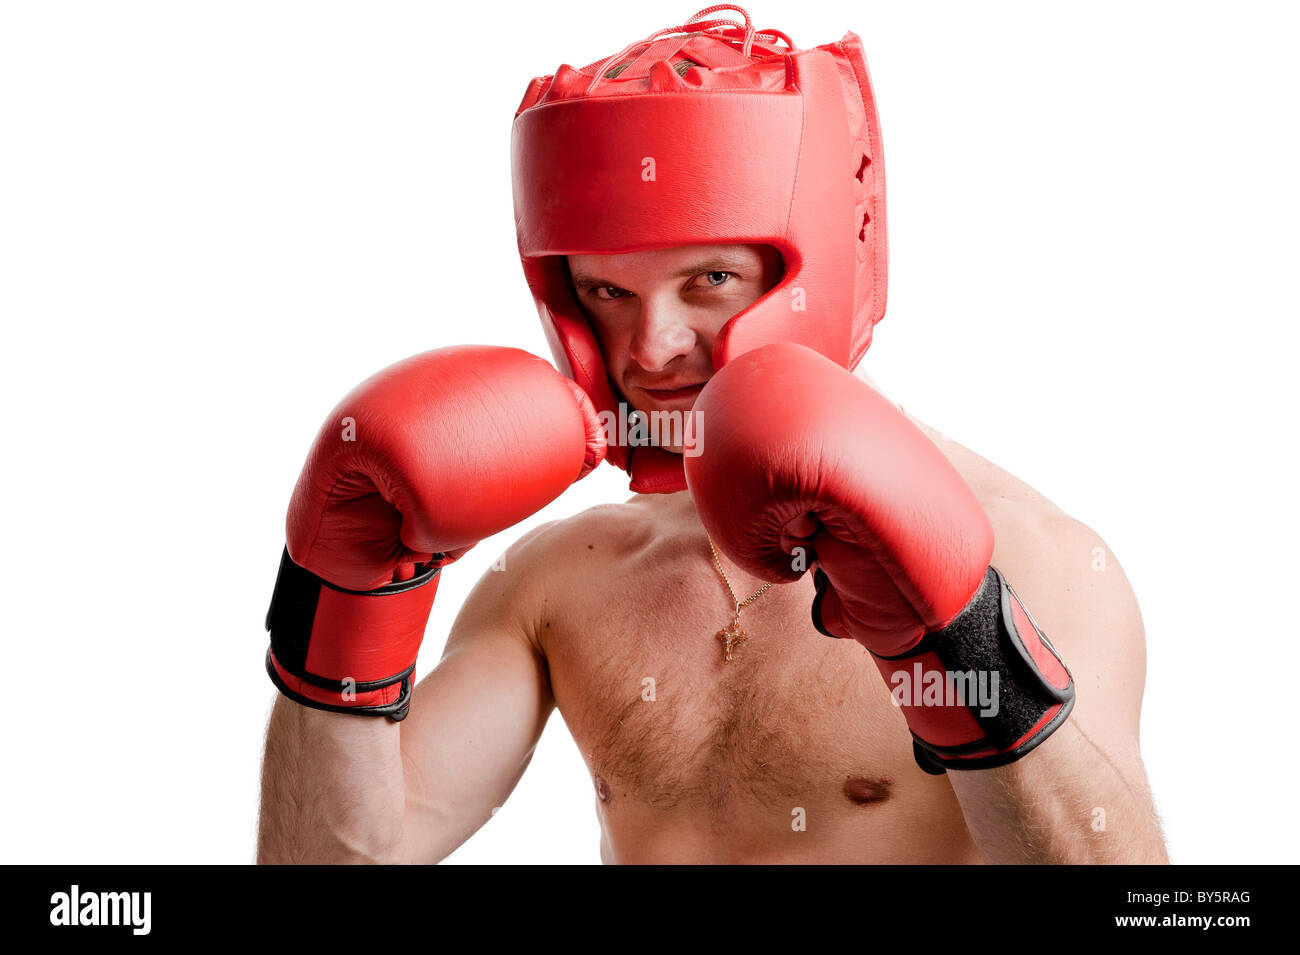 Professional boxer stance isolated on white background Stock Photo